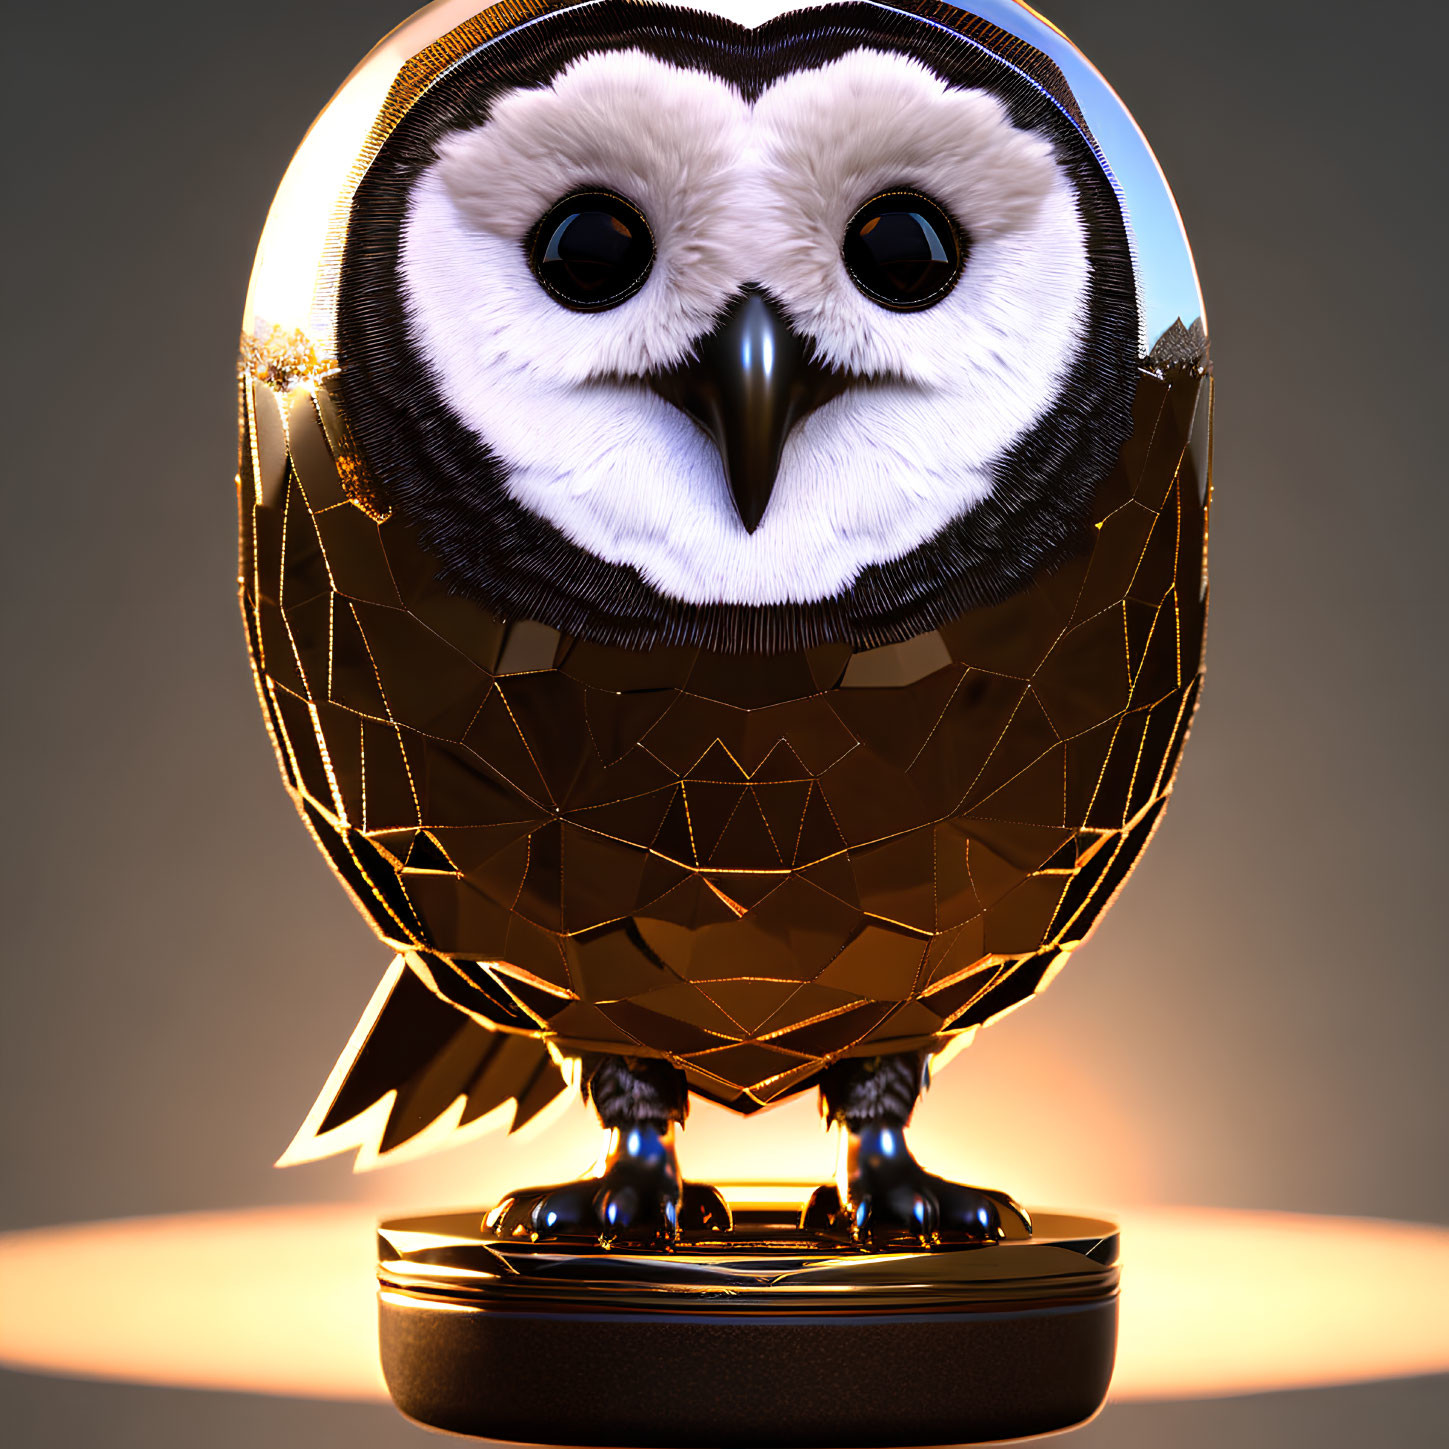 Gold and Black Geometric Owl Figurine on Stand Against Warm Backdrop